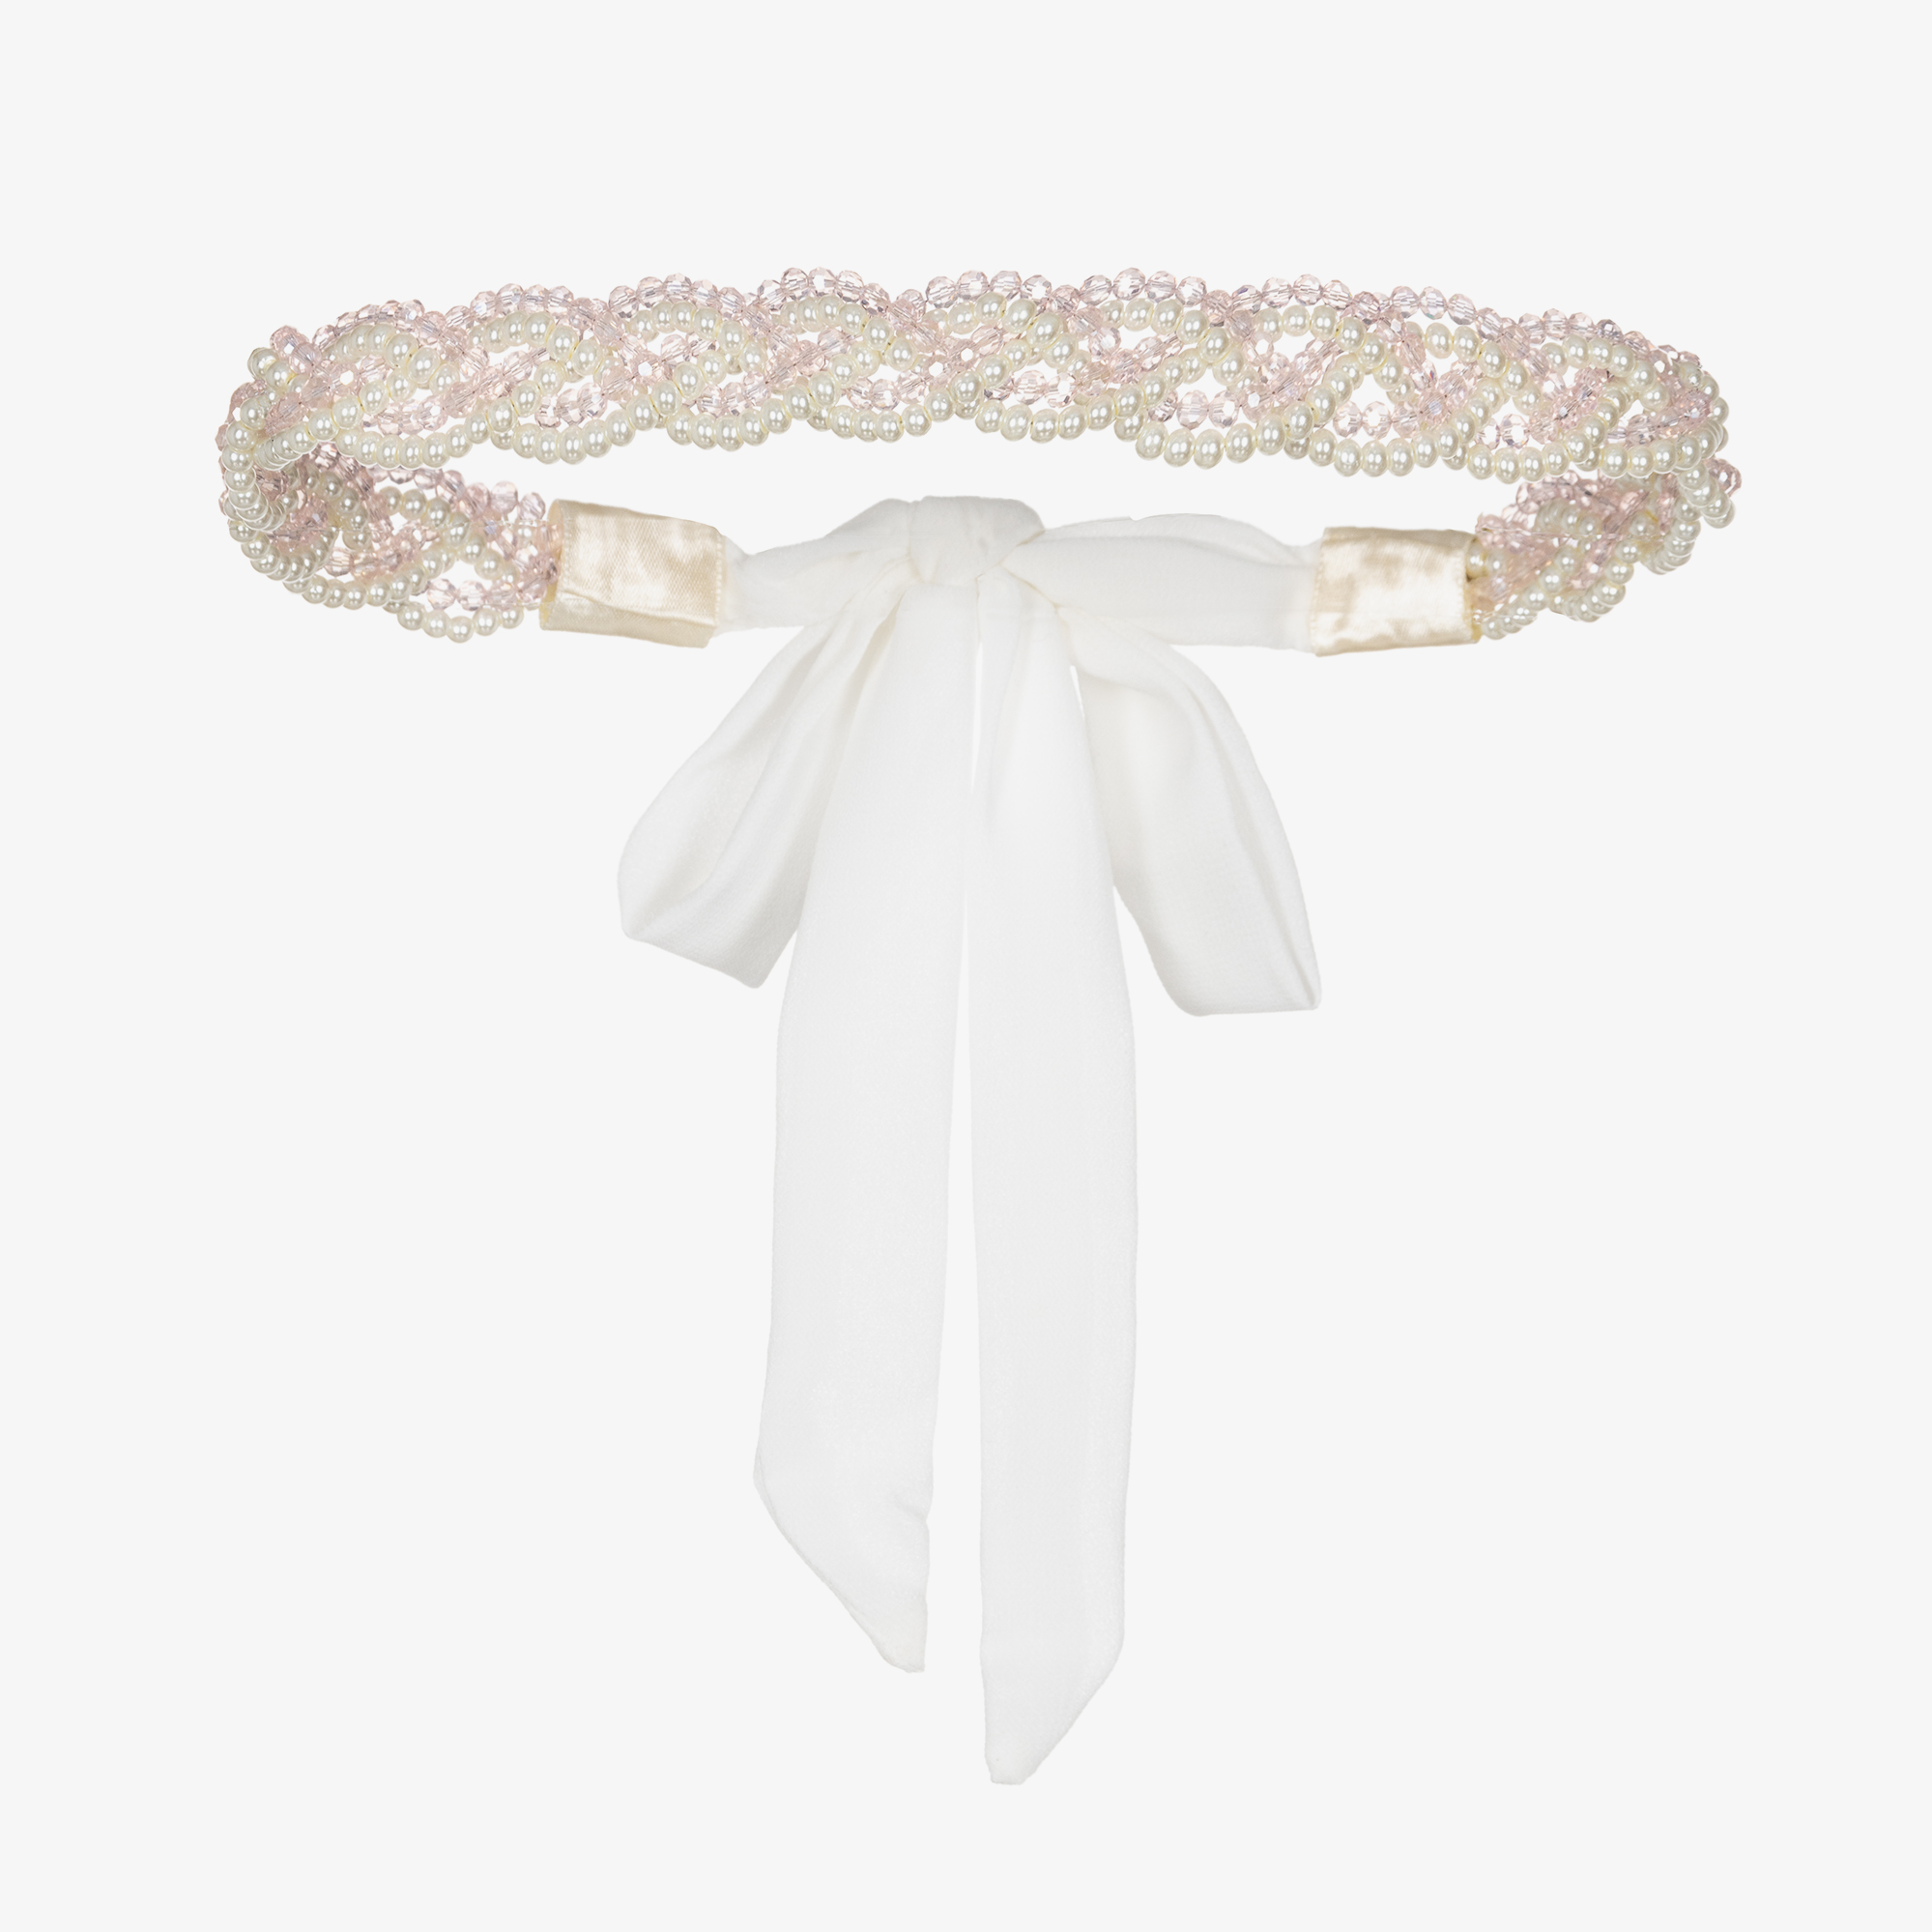 Sienna Likes To Party Girls Pearl & Crystal Garland Hairband